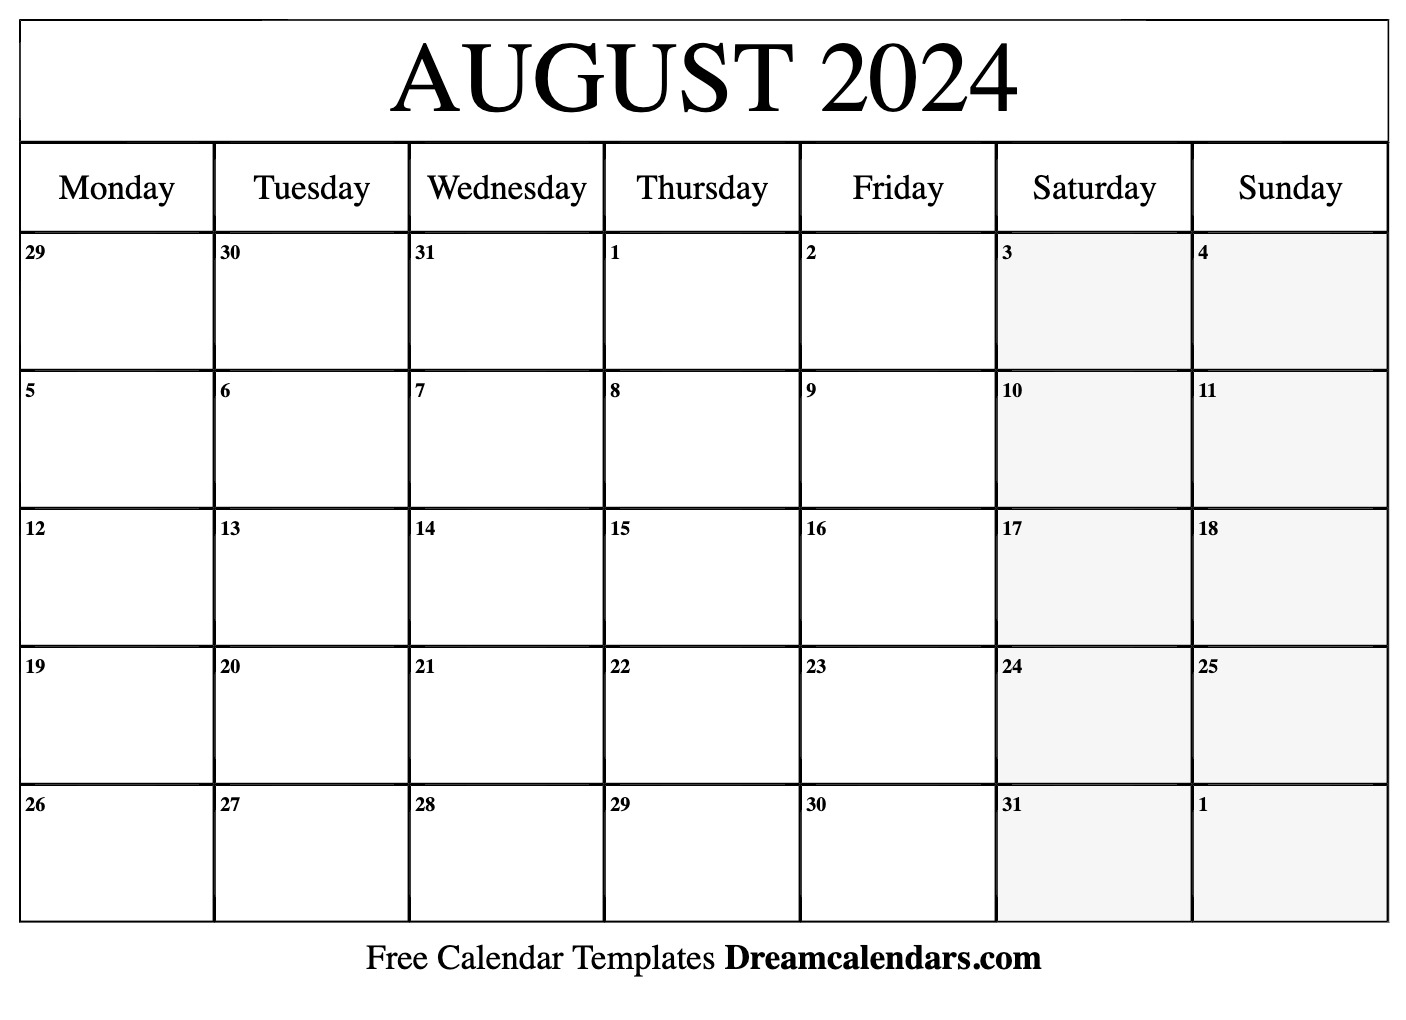 August 2024 Calendar | Free Blank Printable With Holidays for Calendar August 2024 Printable Free